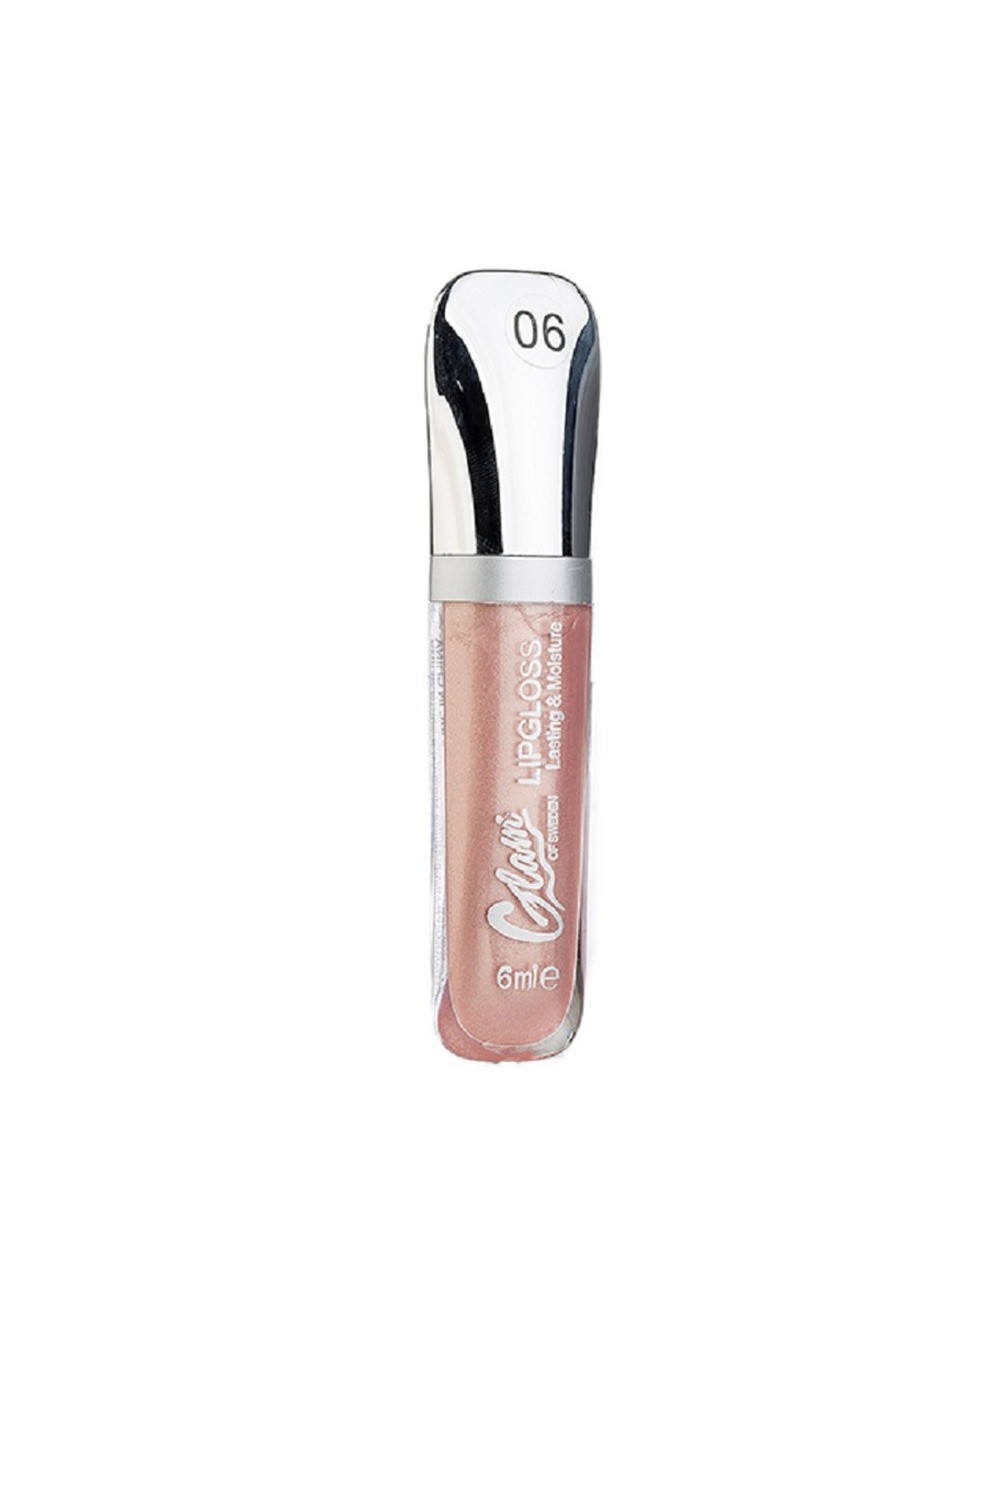 Glam Of Sweden Glossy Shine Lipgloss 06-Fair Pink 6ml